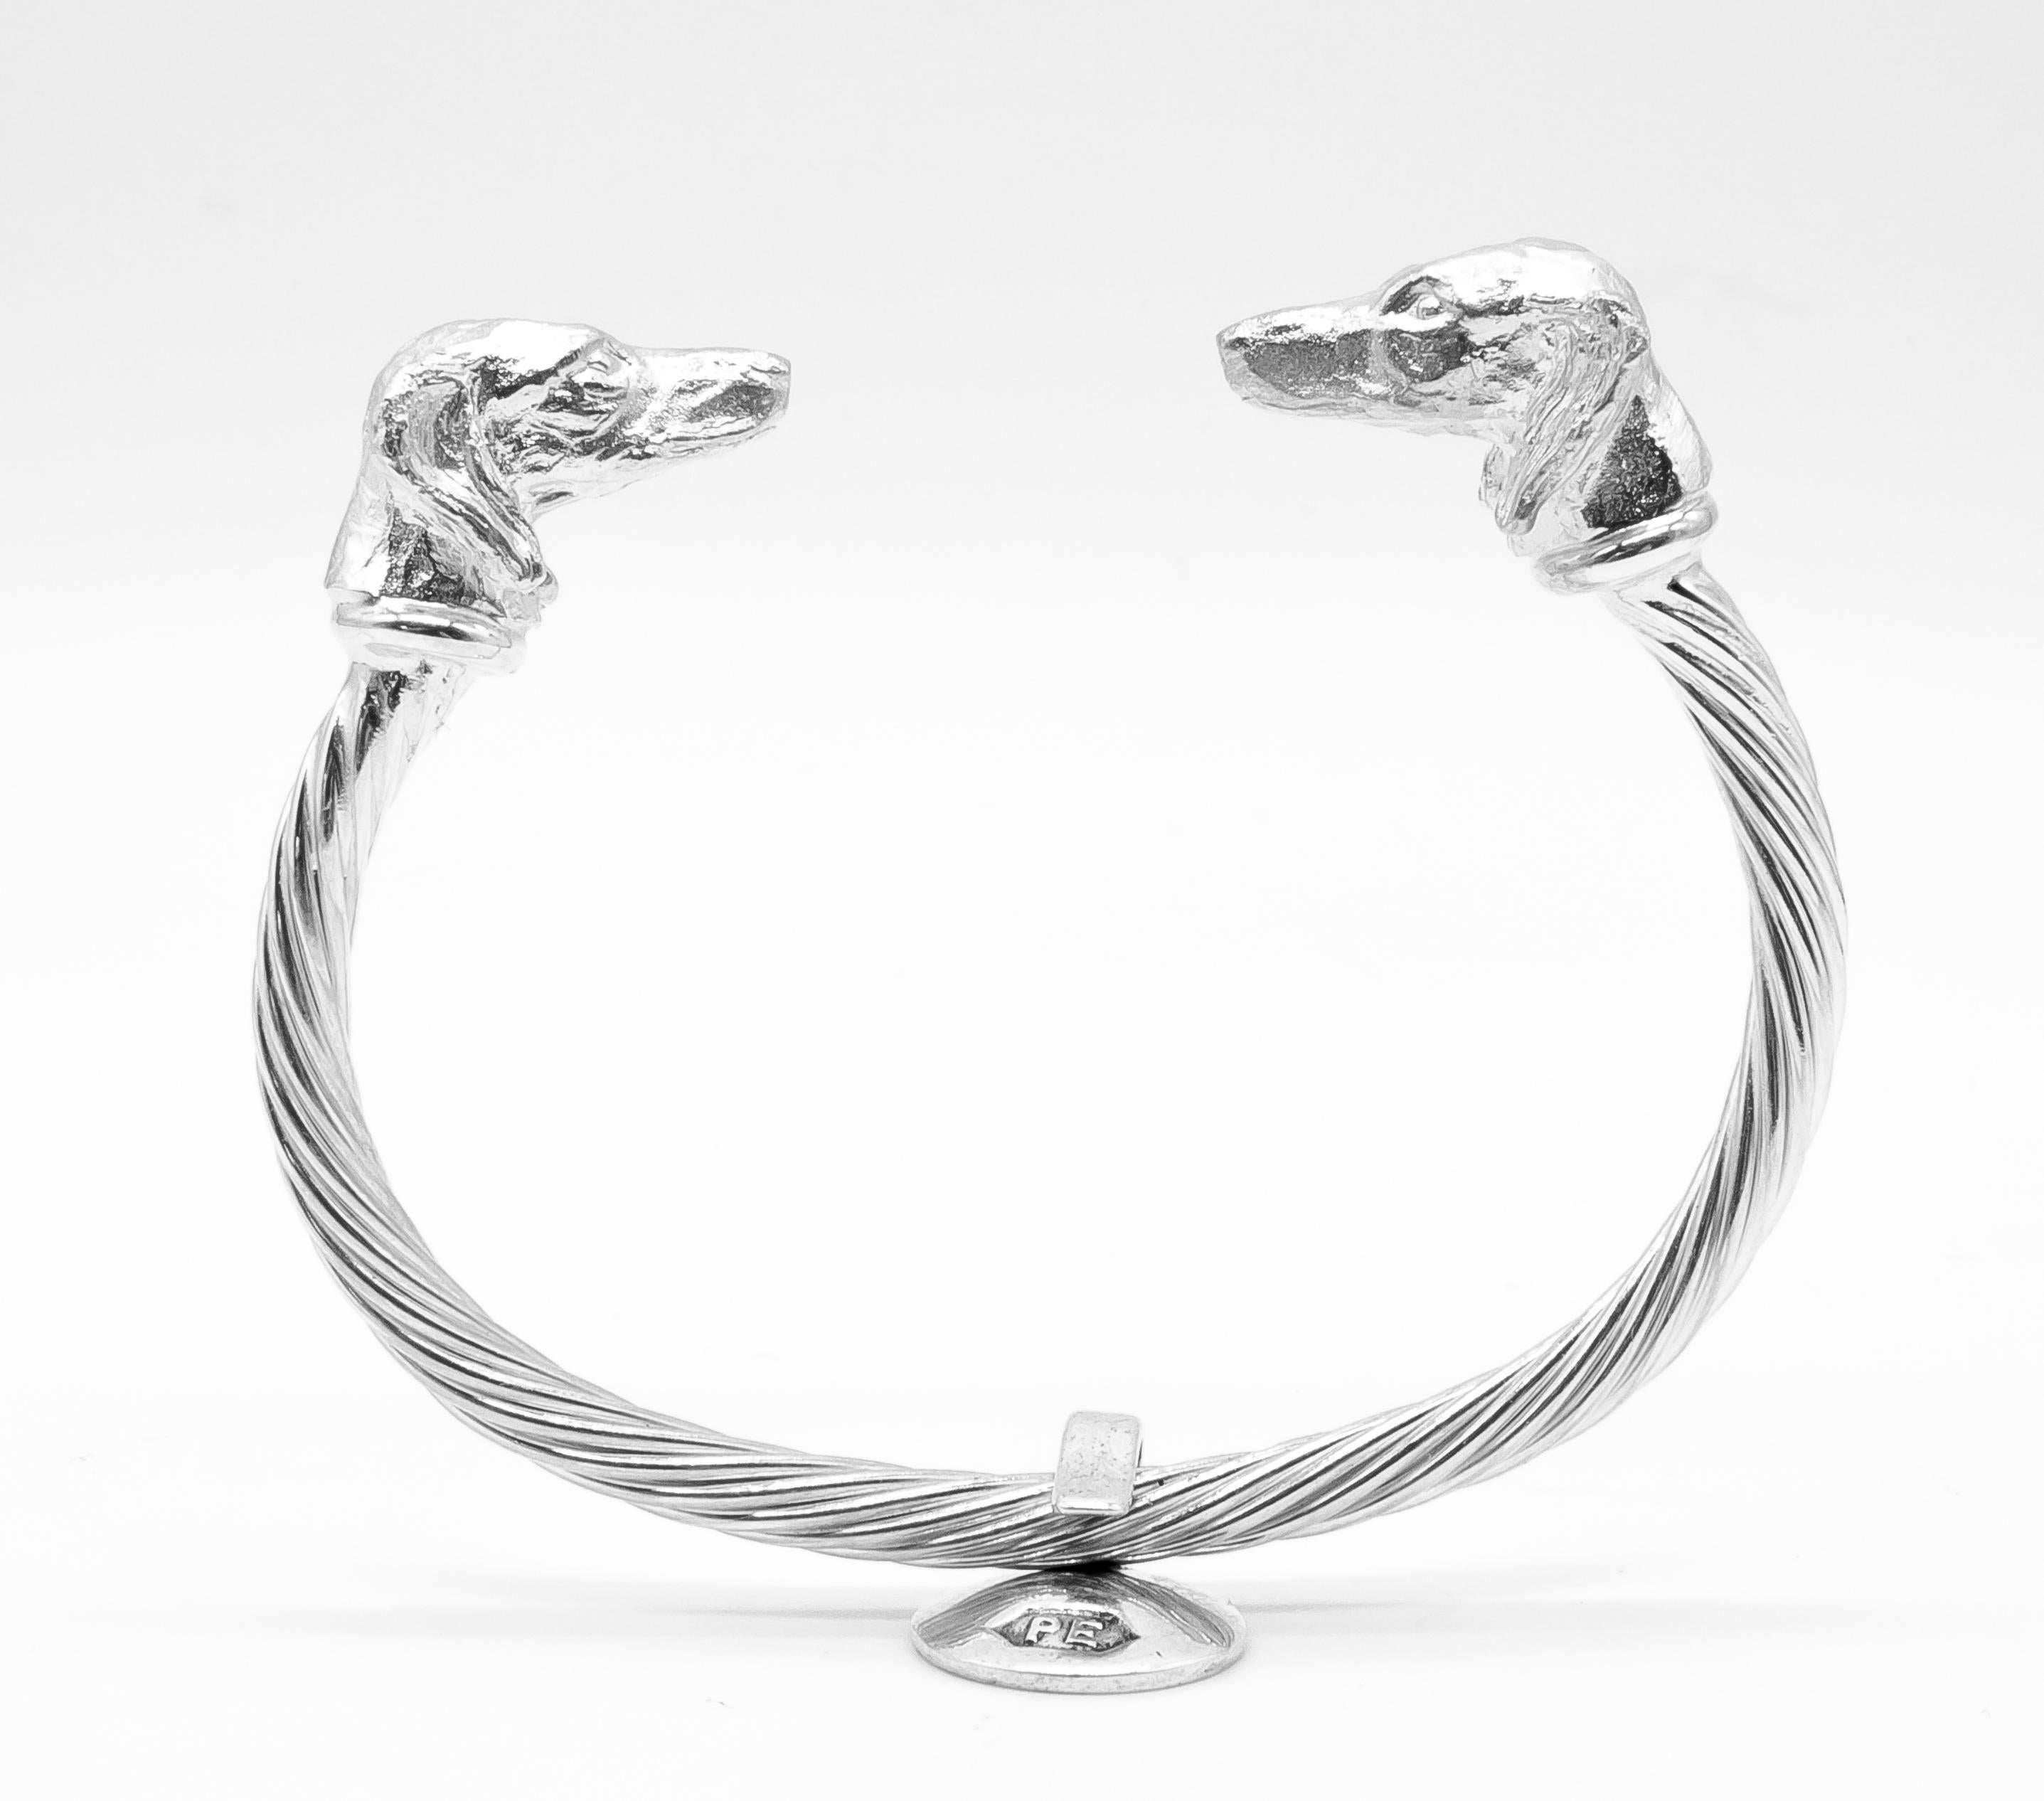 Artist Paul Eaton Sculpted Saluki Dog Heads on Twisted Bangle in Sterling For Sale